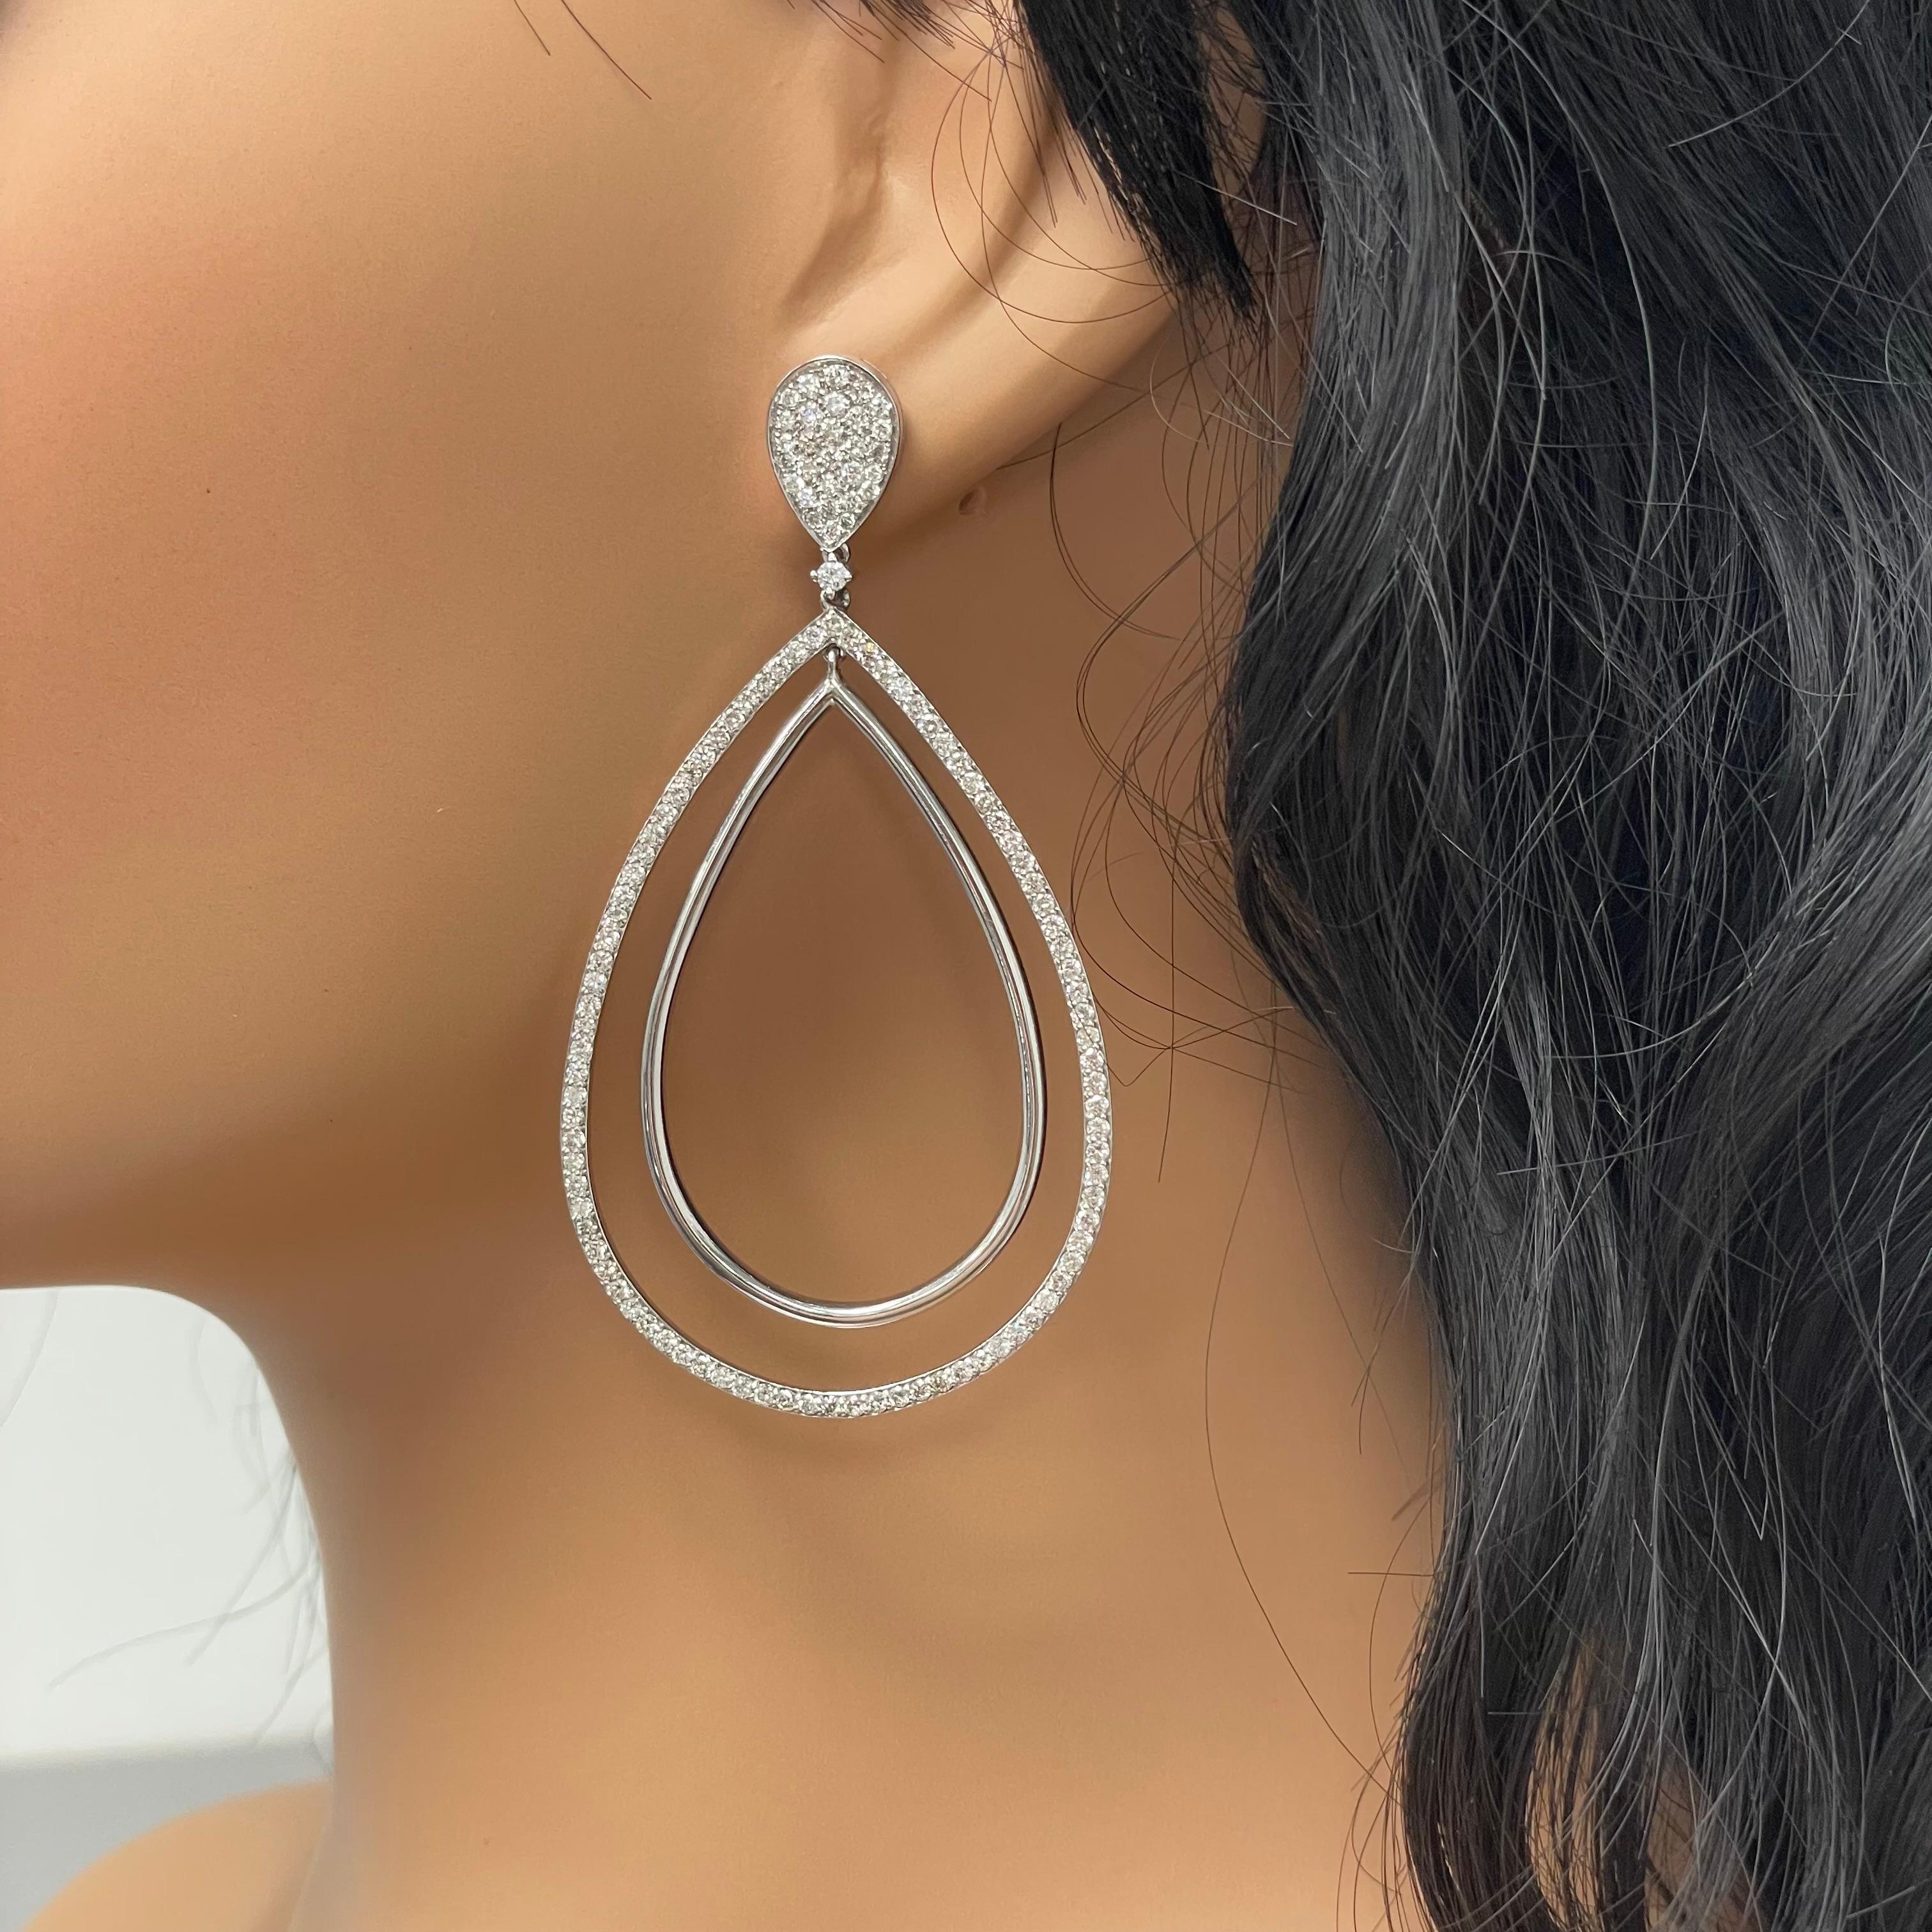 Hip, cool, chic and fun are the best words to describe these large diamond earrings.

Diamonds Shape: Round
Side Diamonds Weight: 4.25 ct
Side Diamond Color: G - H
Side Diamond Clarity: VS - SI

Metal: 14K White Gold
Metal Wt: 19.12 gms 
Setting: